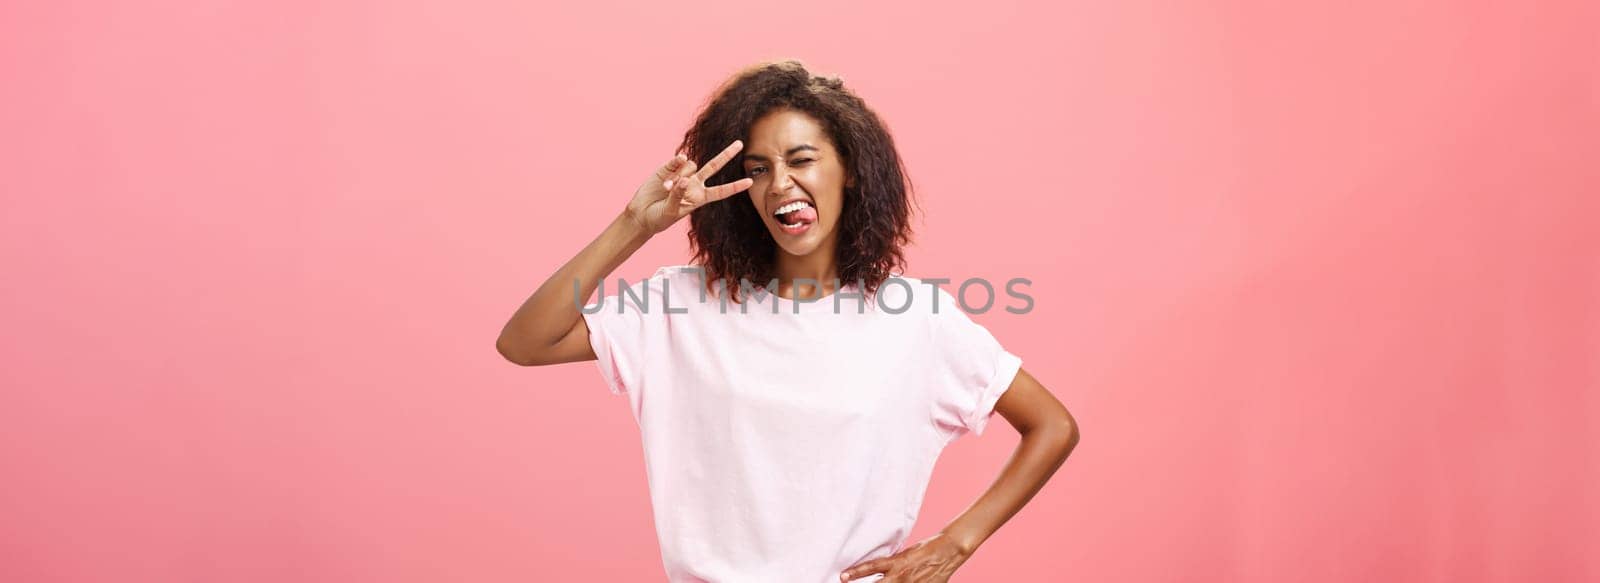 Not afraid express myself. Joyful charismatic african american woman in t-shirt with afro haircut showing tongue playfully and daring making peace sign over eye and winking posing over pink background by Benzoix